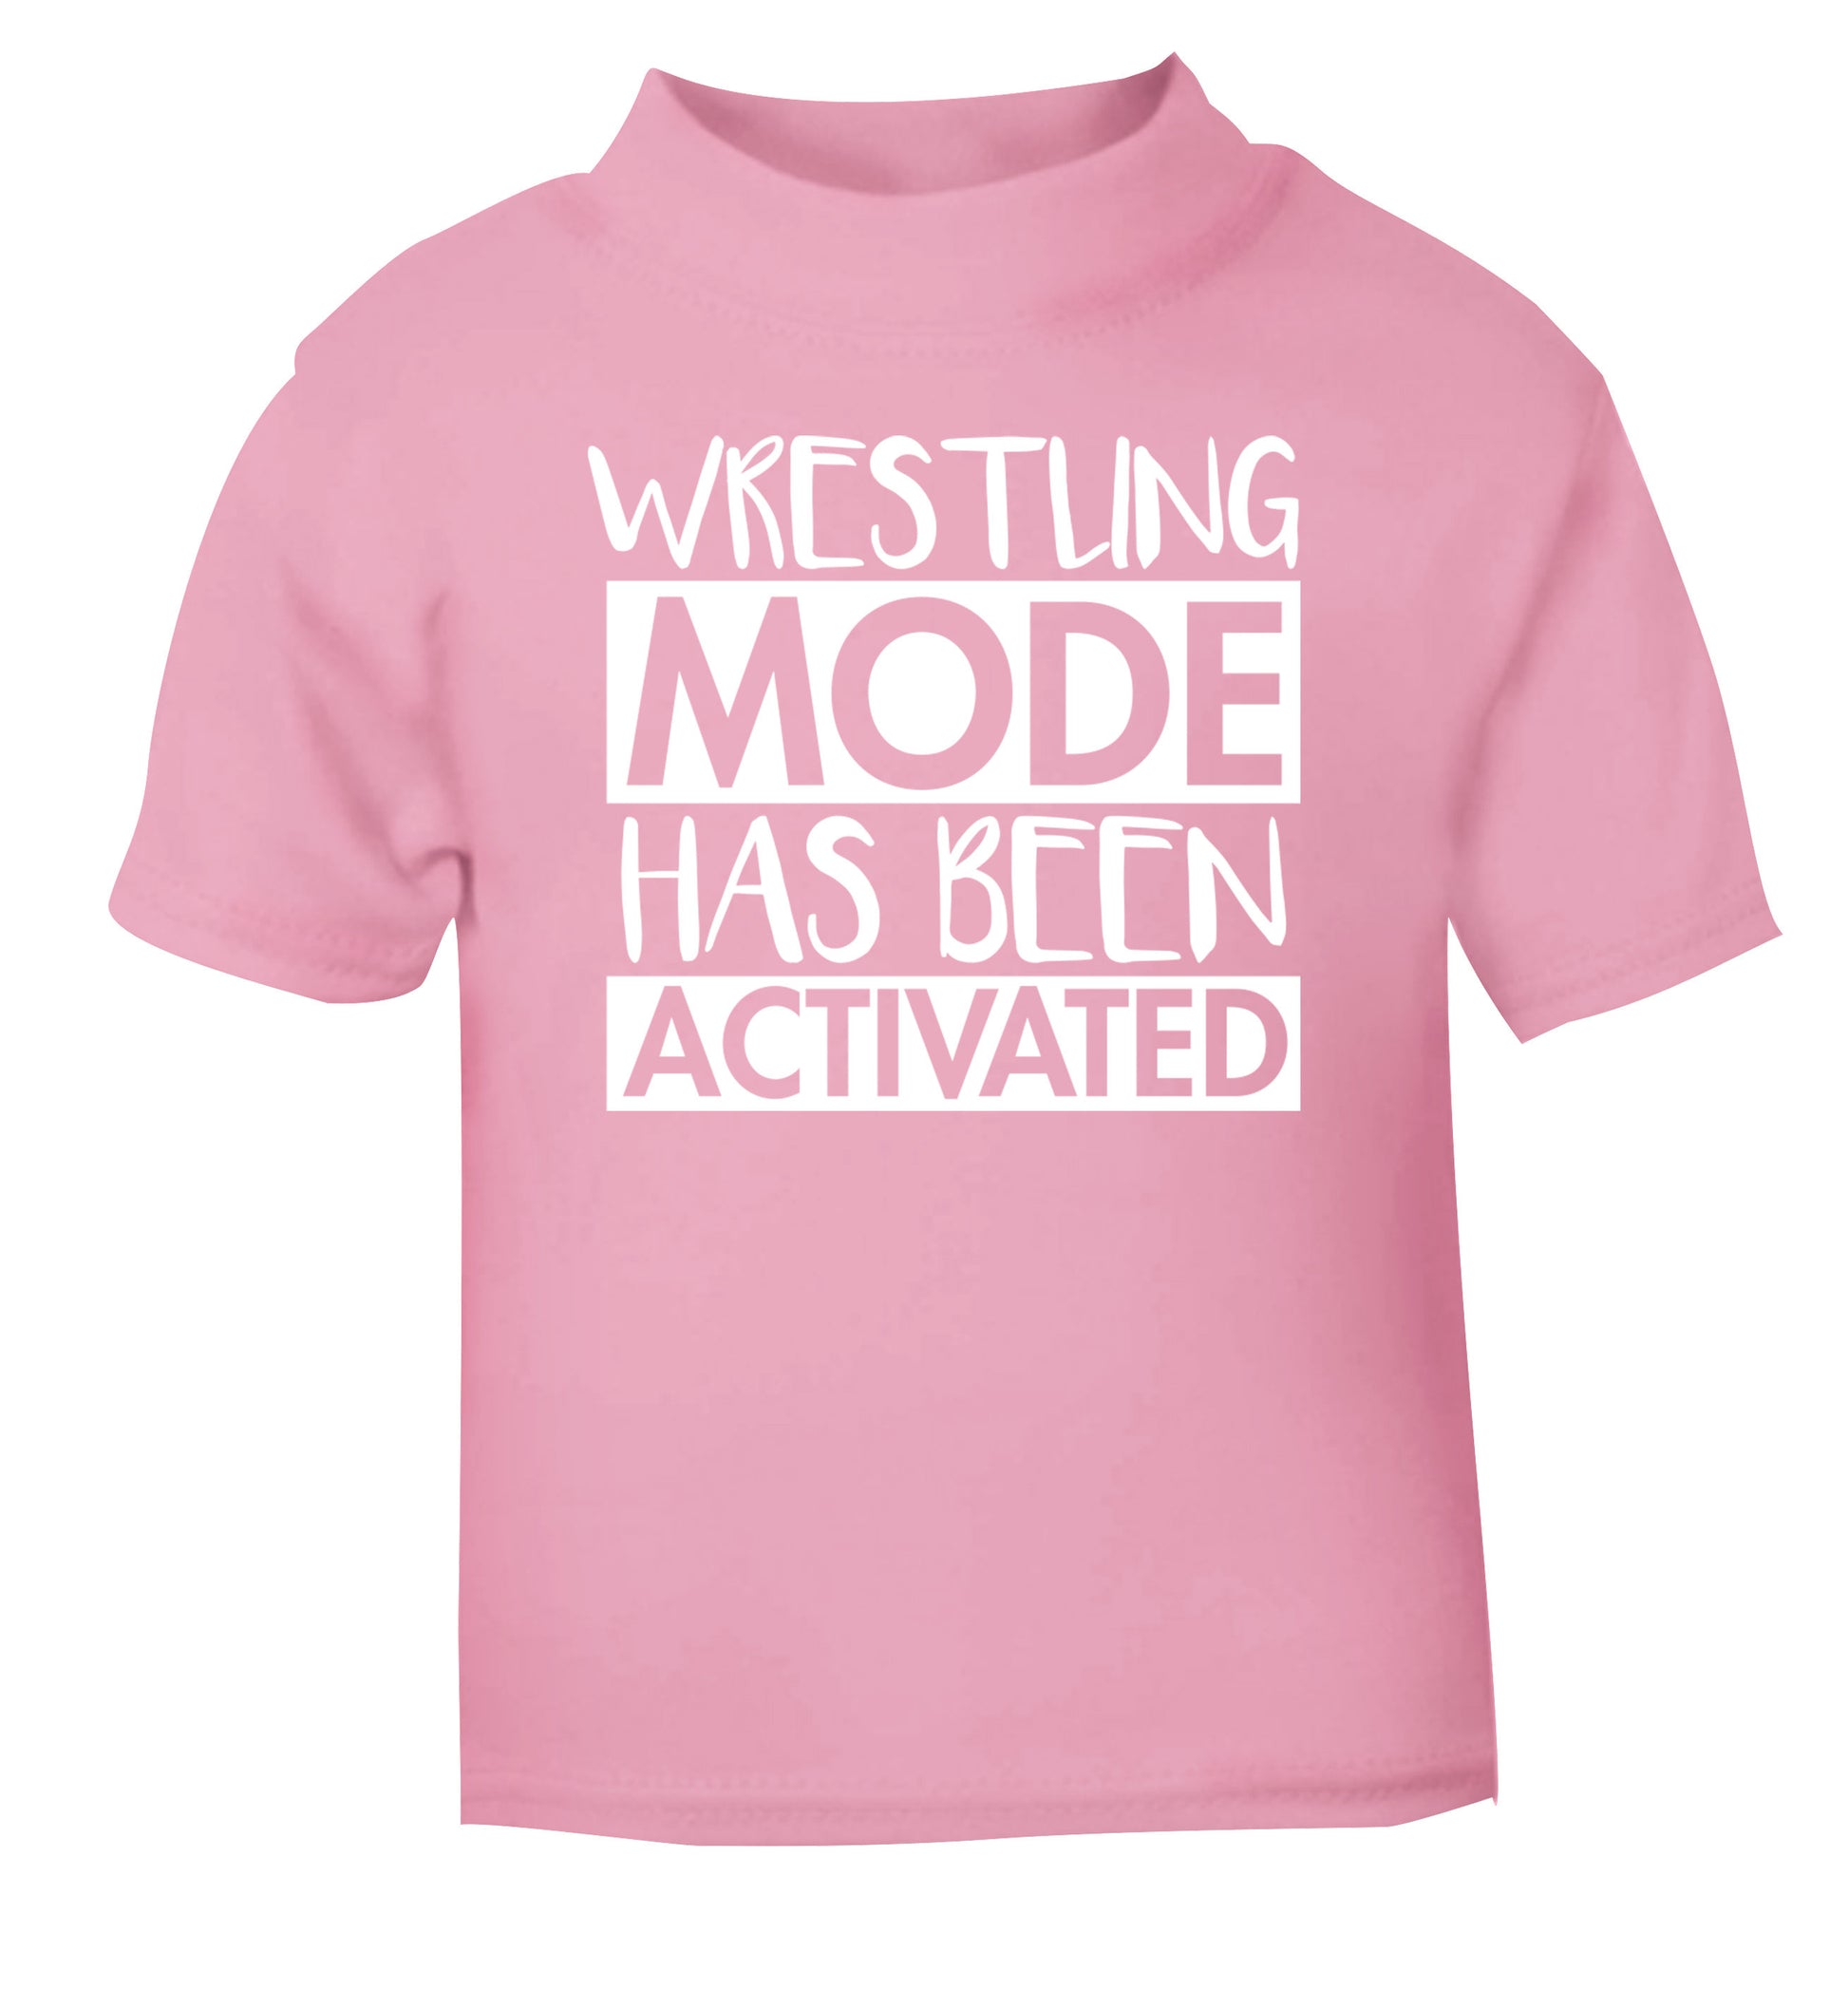 Wresting mode activated light pink Baby Toddler Tshirt 2 Years